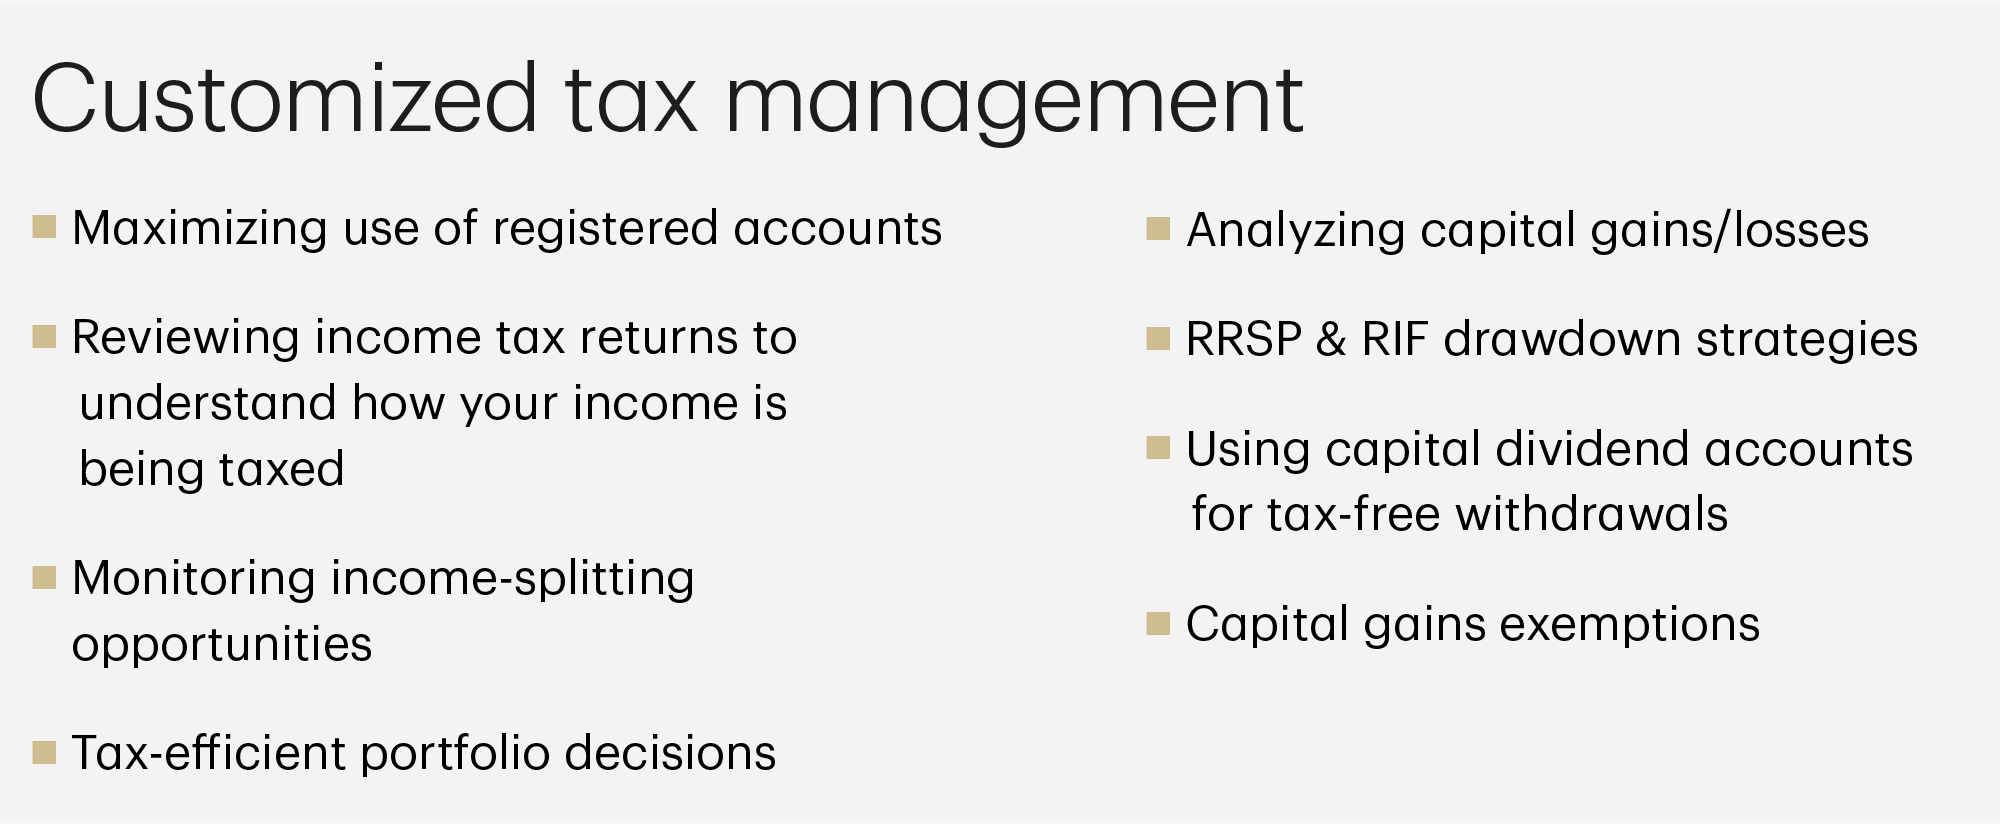 Customized tax management 2000wide_2x.png